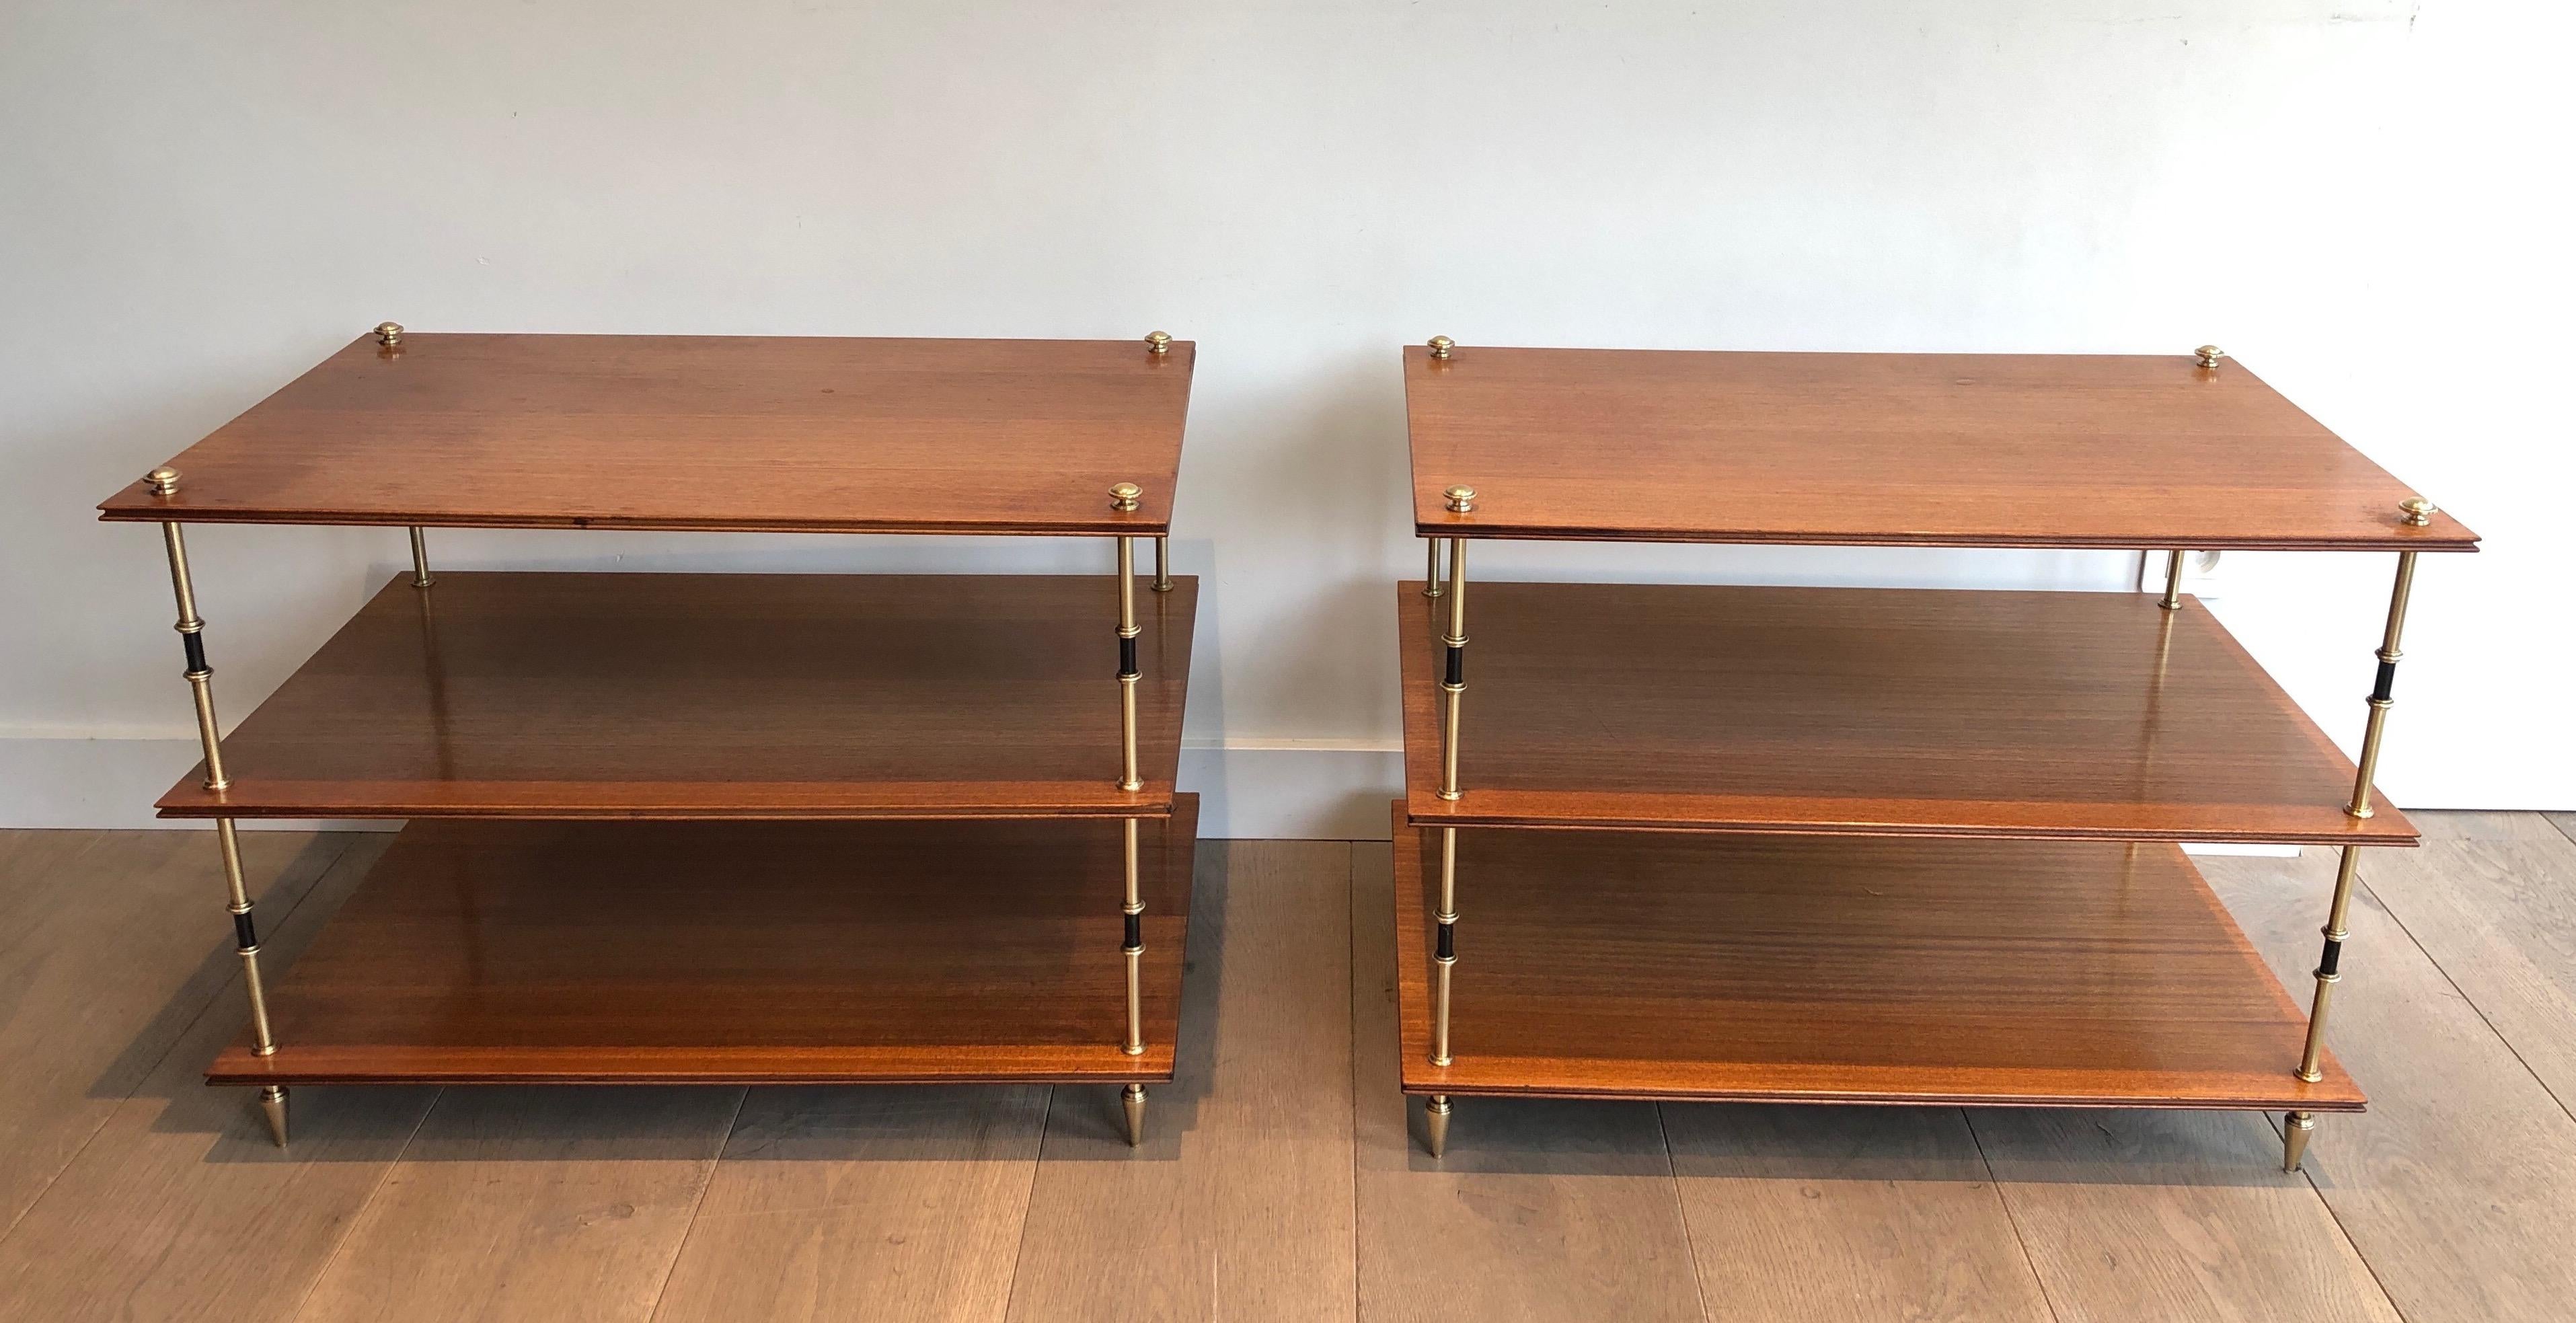 This very nice and rare pair of three tiers consoles or side tables is made of mahogany and brass. The tables are composed of 3 mahogany shelves that are worked all around and of 4 stylished feet with a black lacquered element on their center. This